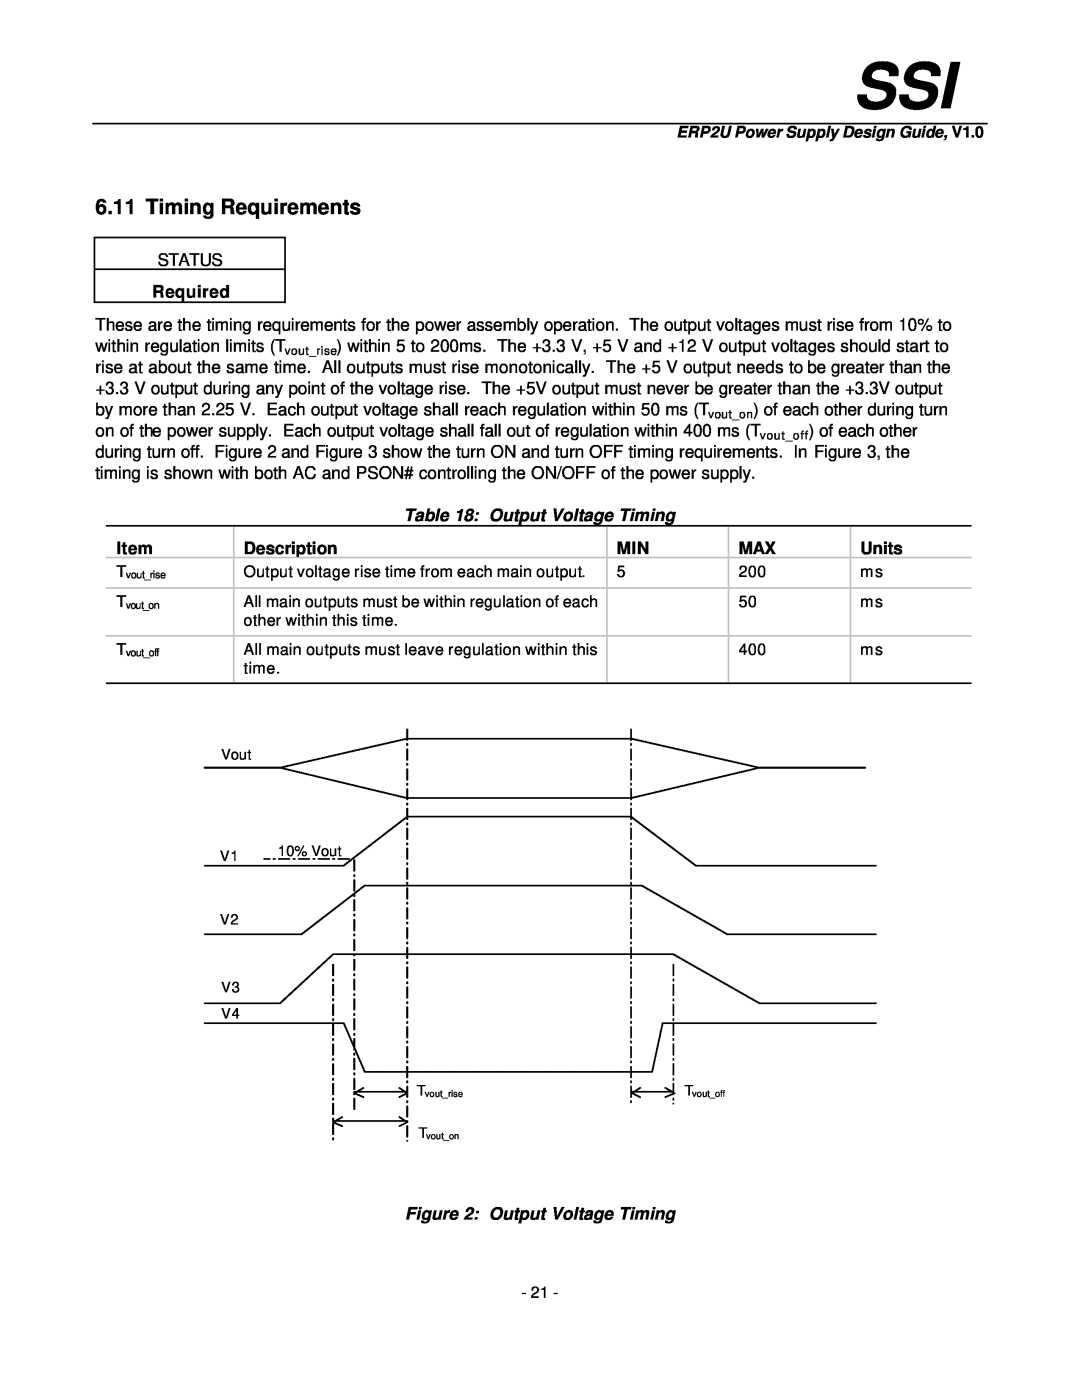 Intel ERP2U manual Timing Requirements, Output Voltage Timing 